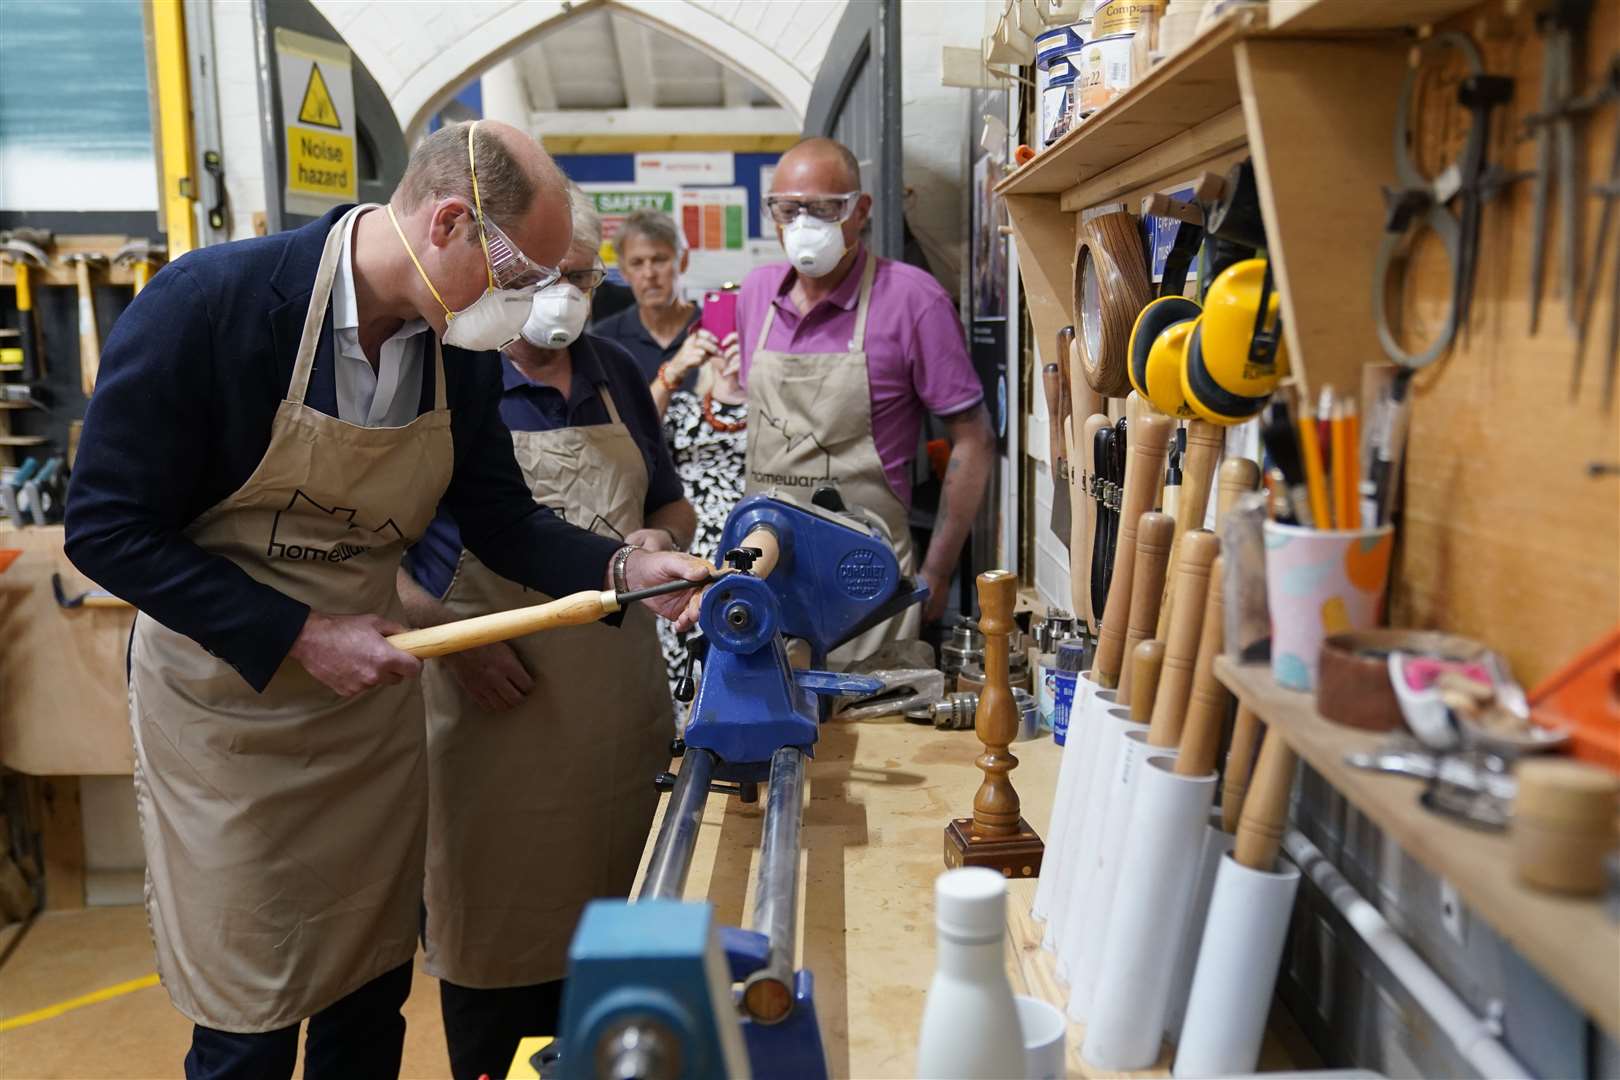 The Prince of Wales used a lathe during a visit to Faithworks’ carpentry workshop (Andrew Matthews/PA)